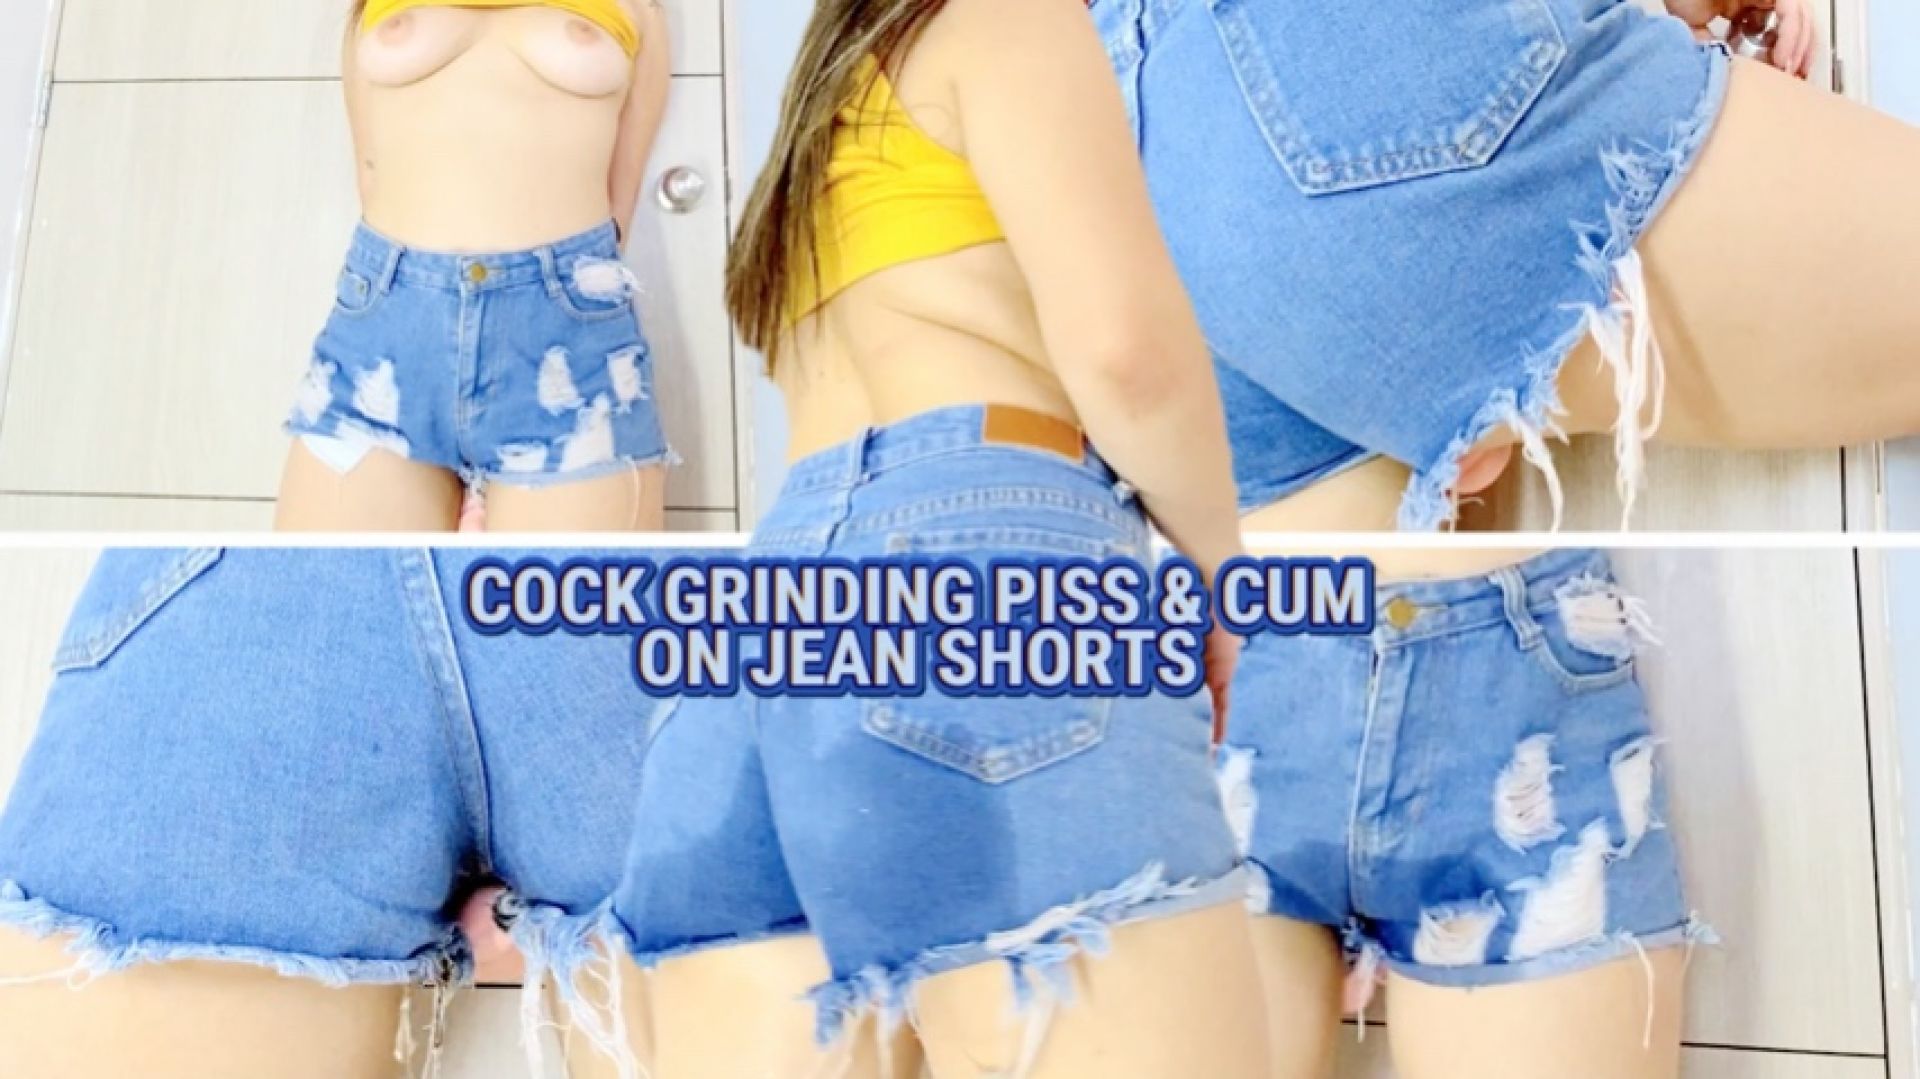 leaked COCK GRINDING PISS & CUM ON JEANS SHORTS thumbnail